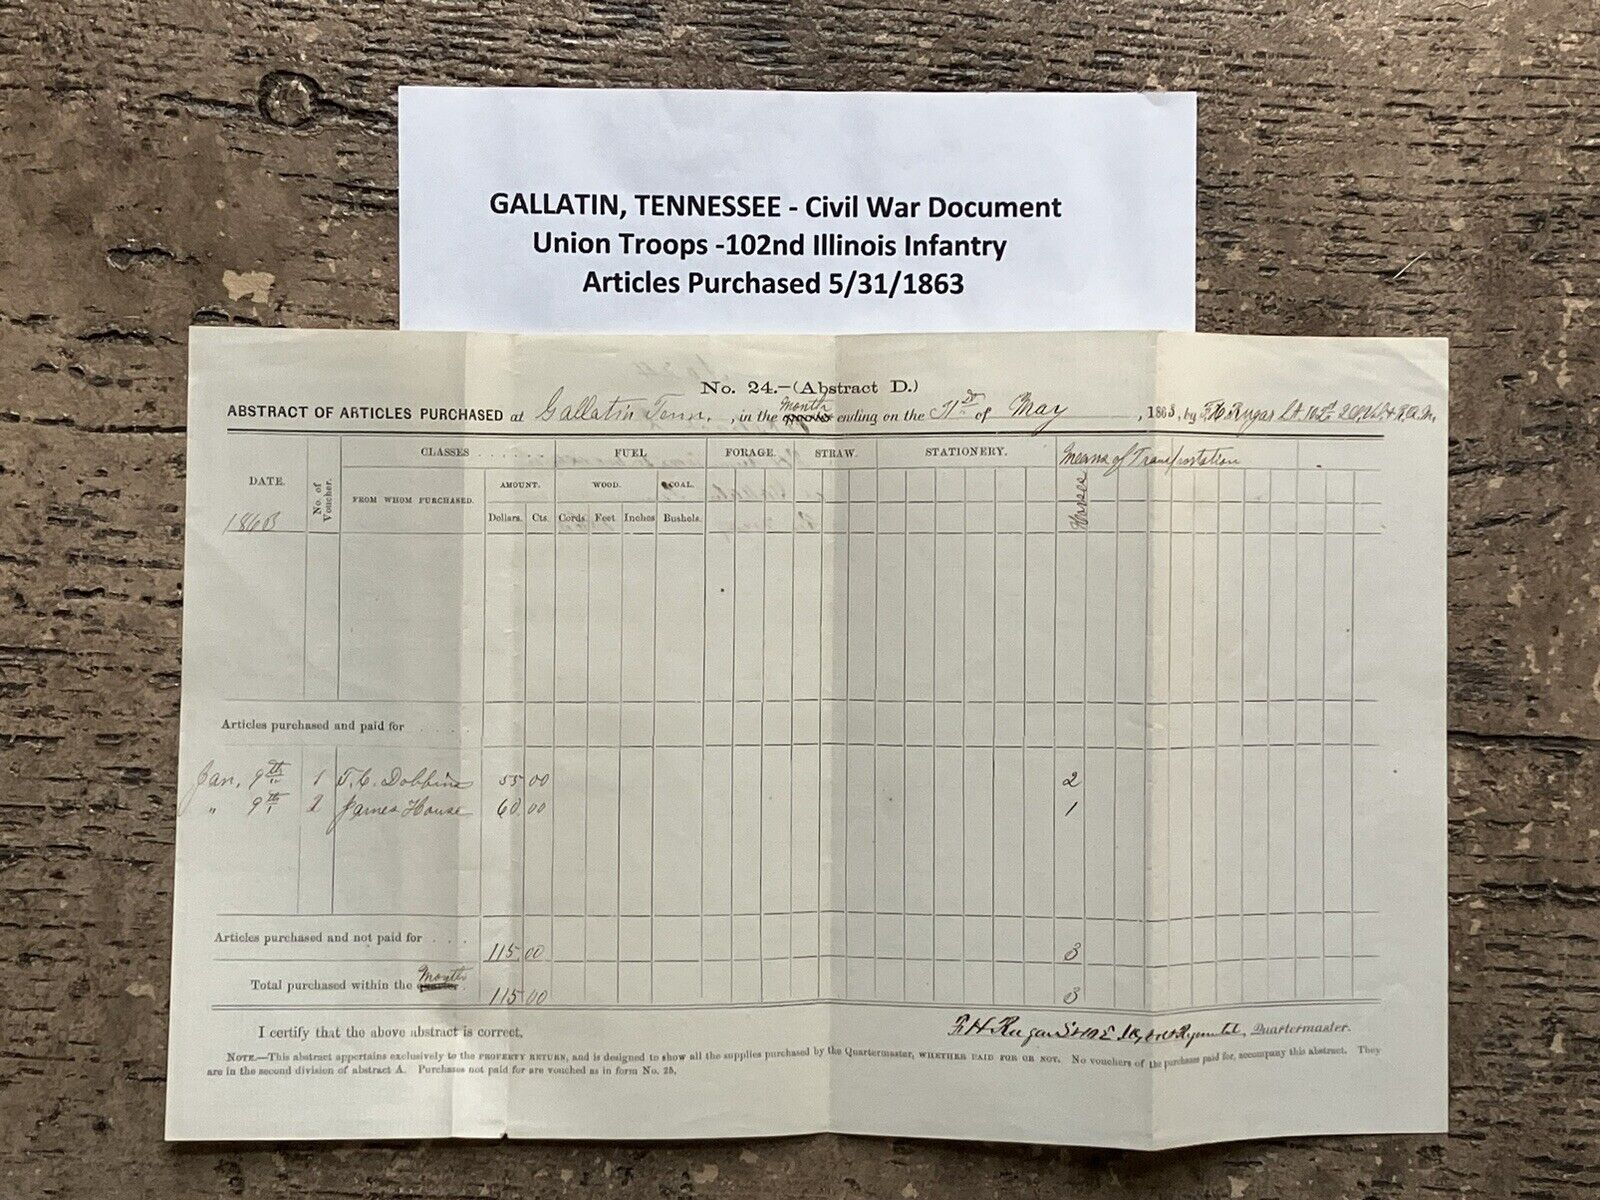 1863 - CIVIL WAR DOCUMENT - 102nd Ill. Inf. - Purchased 3 horses in GALLATIN, TN